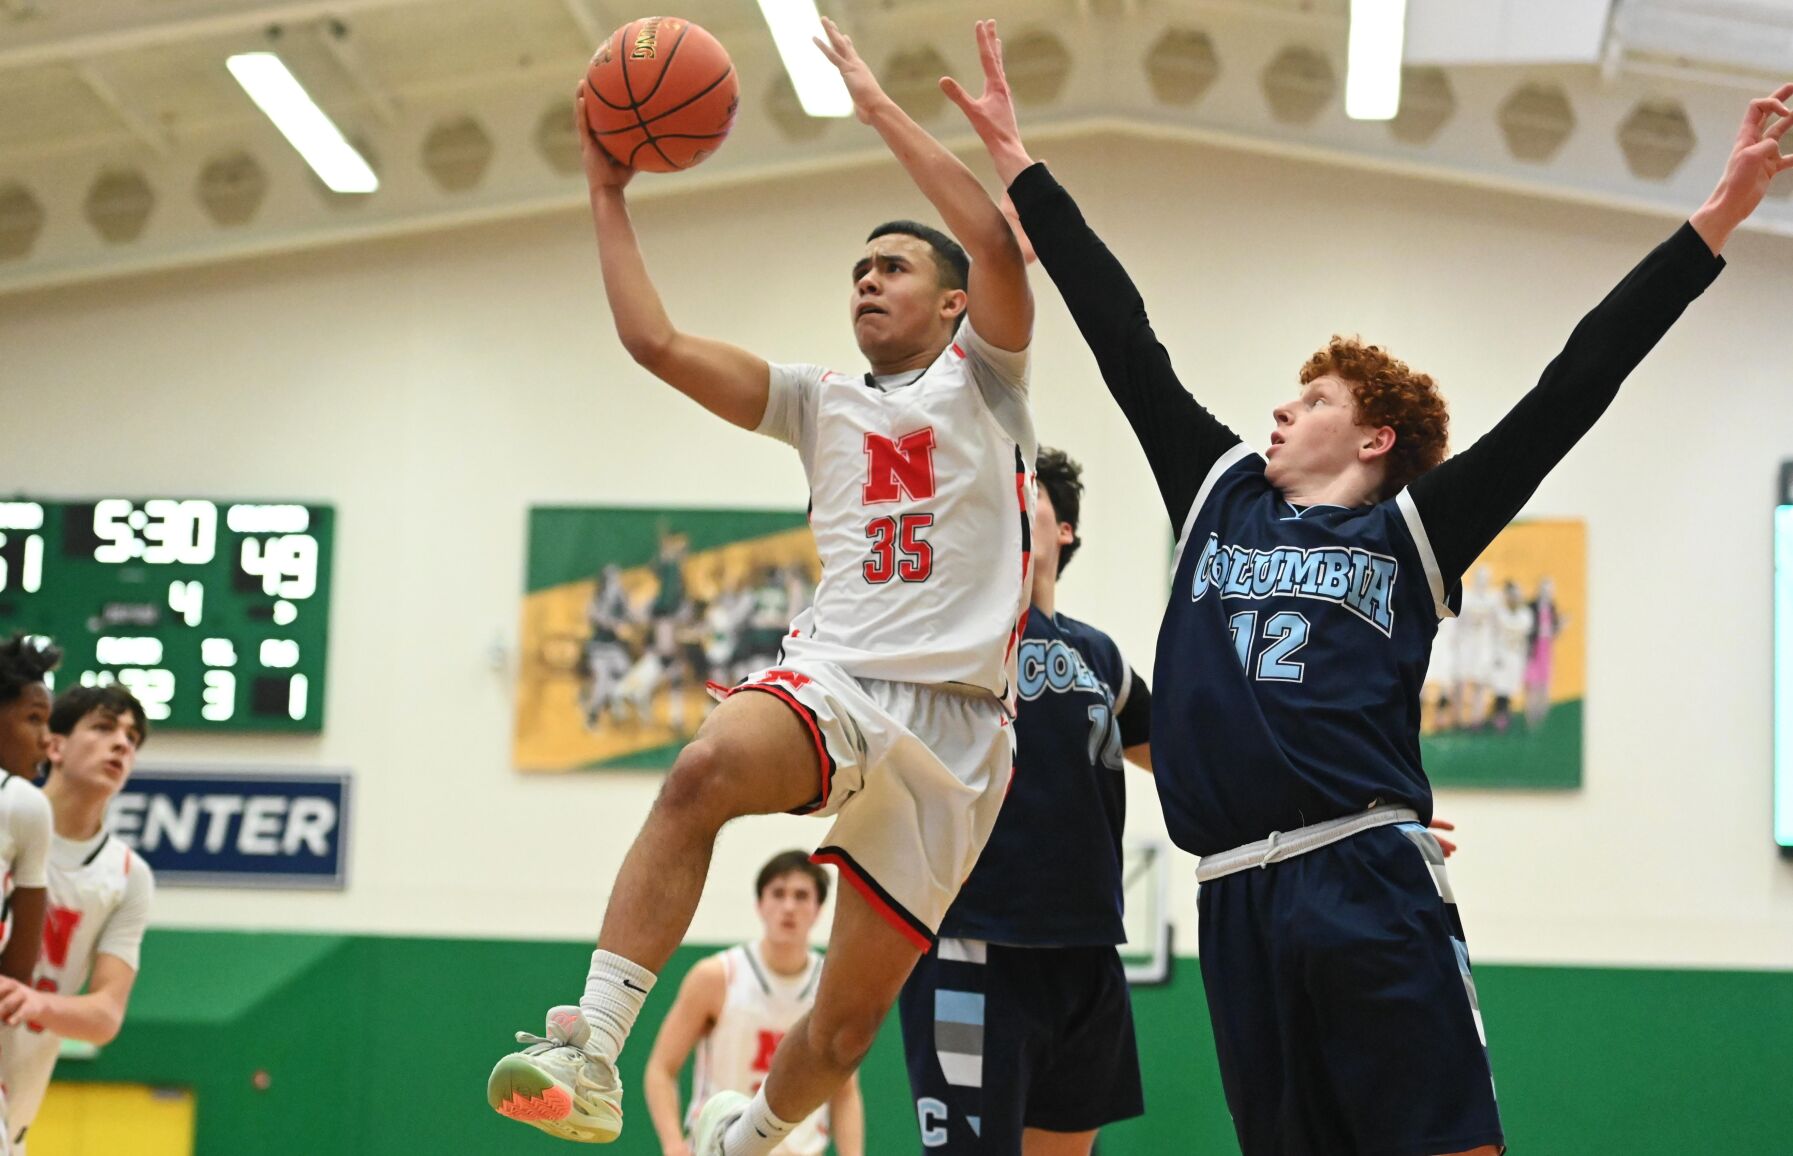 Niskayuna’s Epic Comeback Secures 63-59 Victory Against Columbia in Section 2 Class AA Quarterfinals